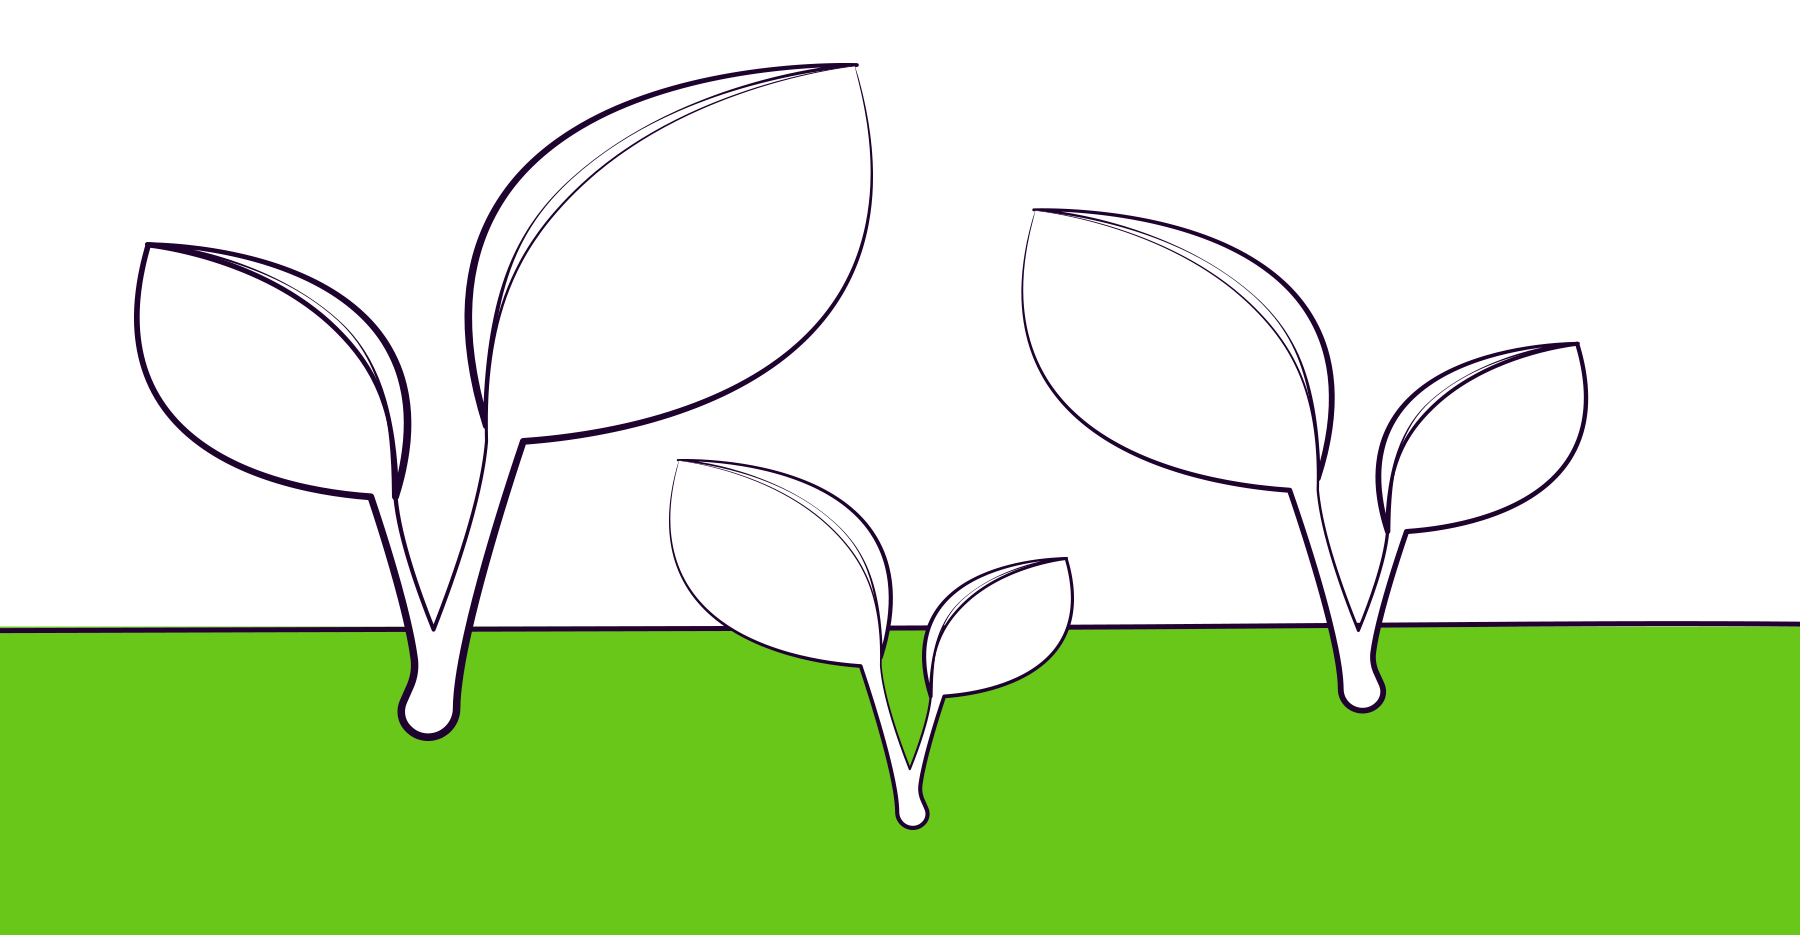 An illustration of three sprouts over a green background